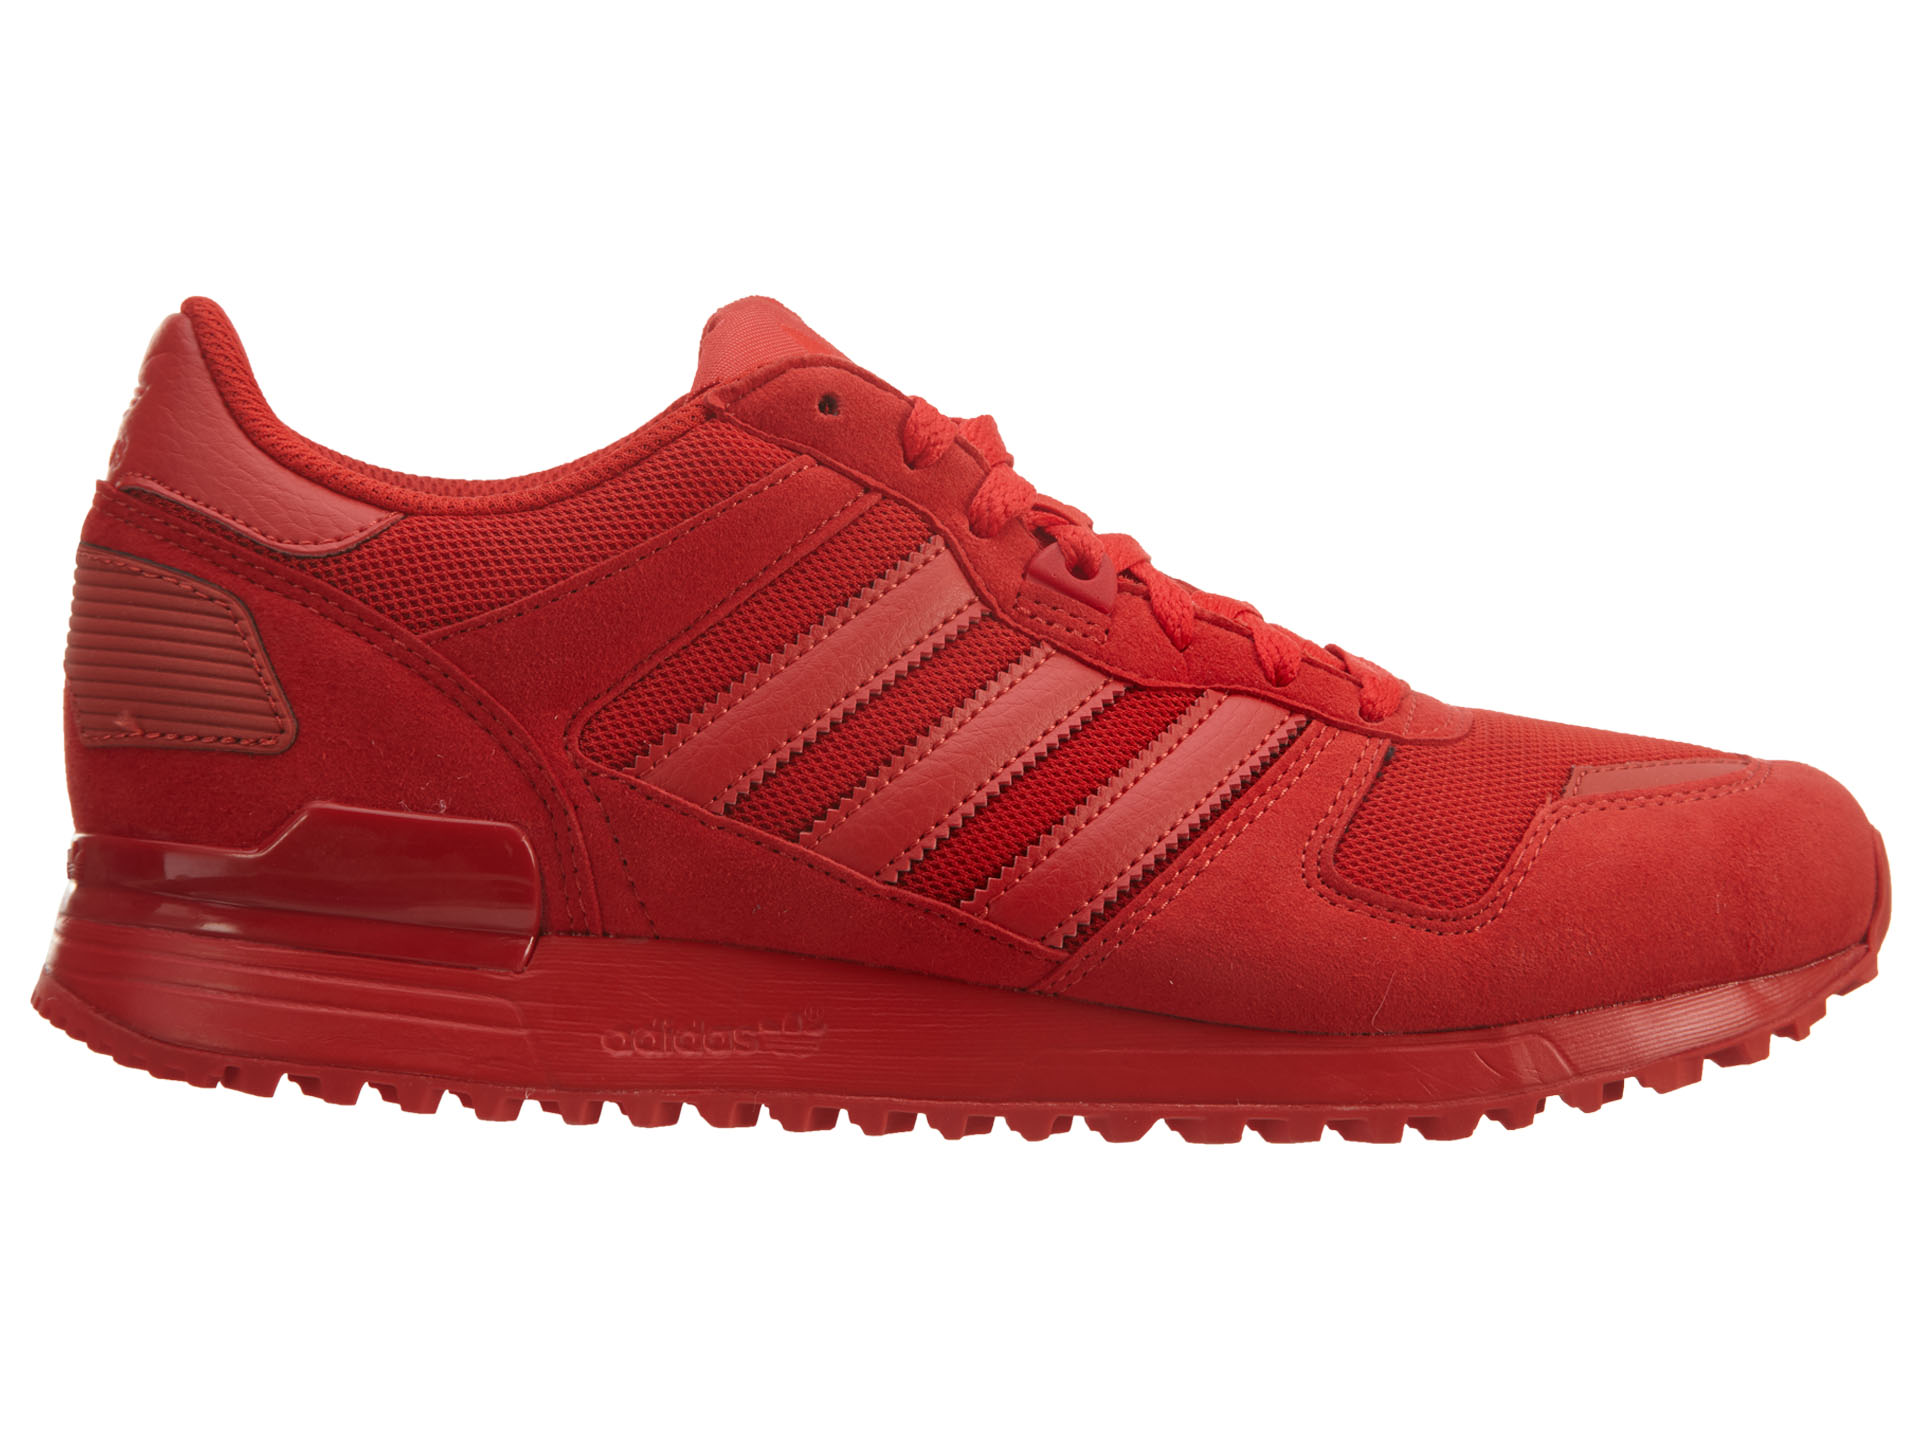 adidas Zx 700 Red/Red/Red Men's - S79188 - US